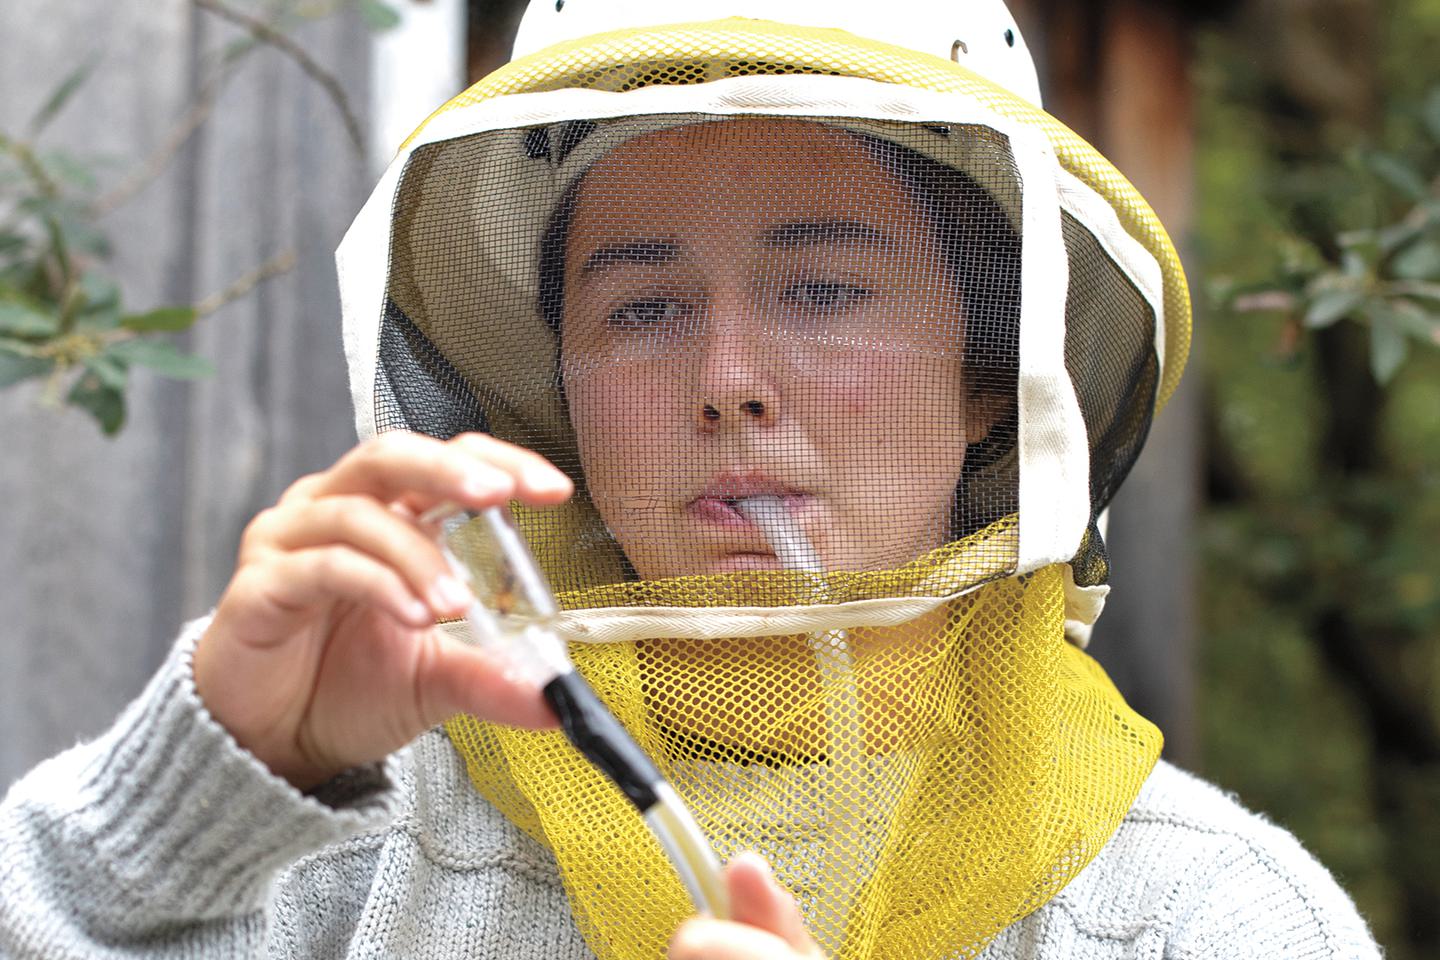 Marina Andreadis ’24 extracts a honey bee from the hive. A screen in the tube protects her from swallowing one.